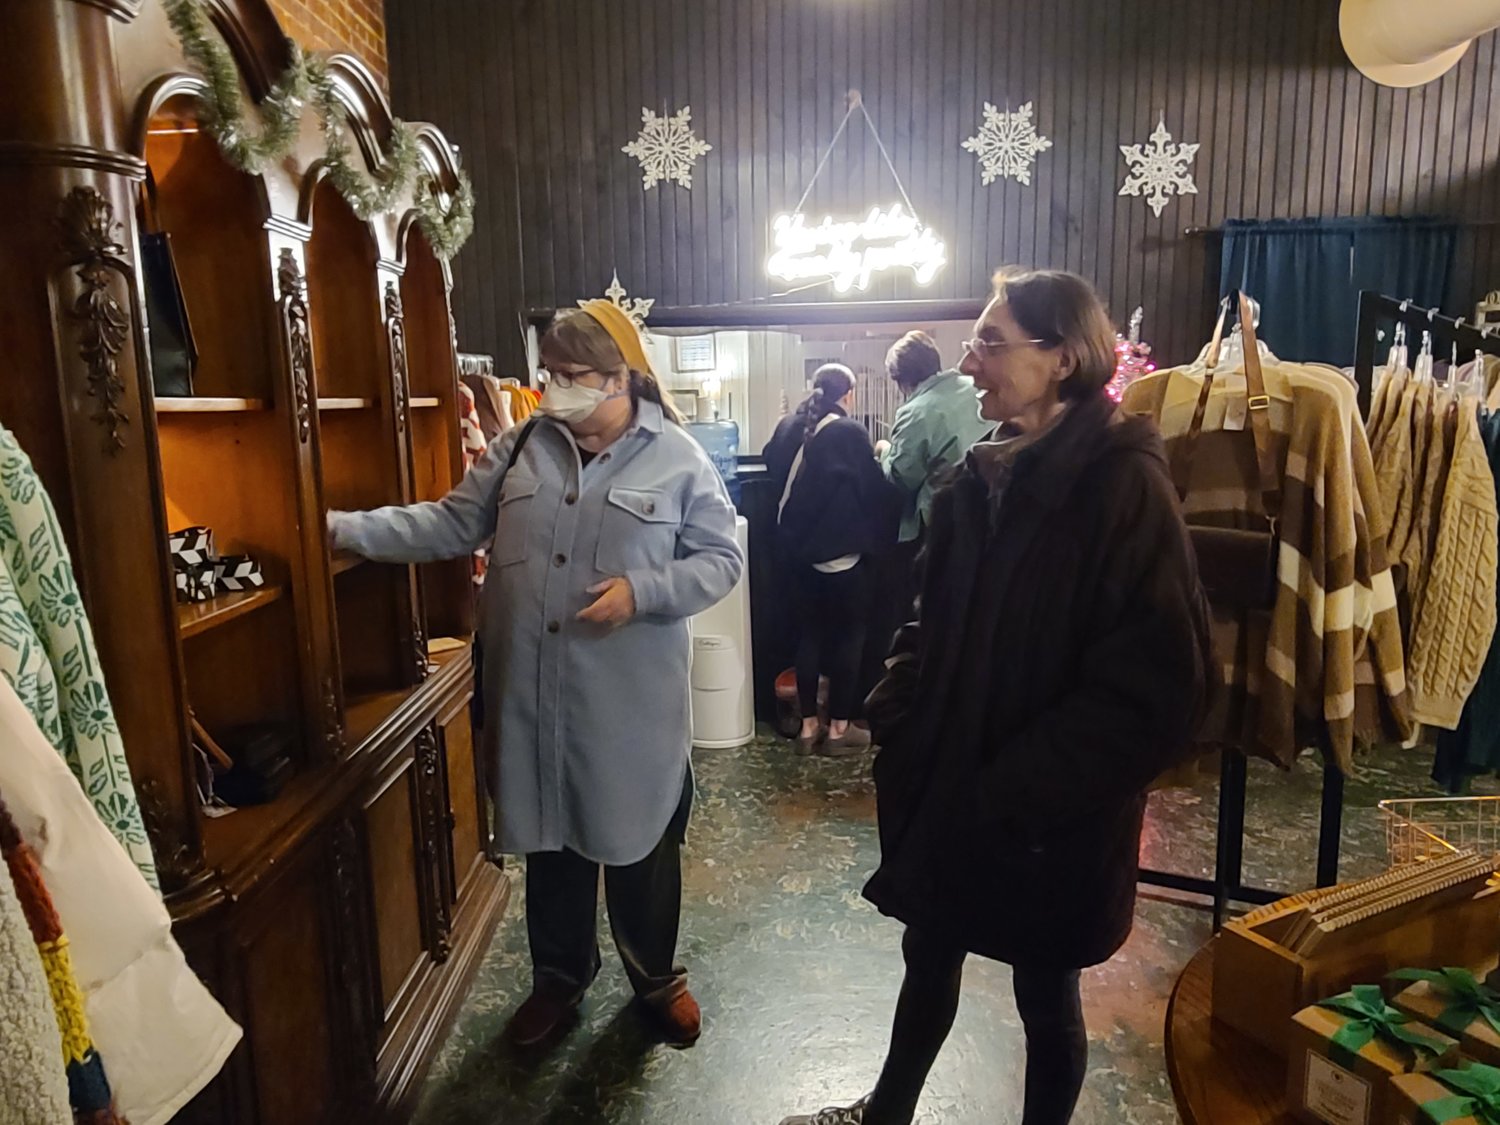 Laura Washburn, left, and Myriam Krepps browse Audacious Boutique during this week’s Late Night Thursdays downtown event. To assist holiday shoppers, many stores are staying open until 7 p.m. on Thursdays through the month of December. As an added incentive, each store was given five vouchers for a commemorative ornament to hand out to the first five customers who shop after 5 p.m. Sydney Anselmi, owner of Audacious Boutique, had already handed out all her vouchers before 6 p.m.